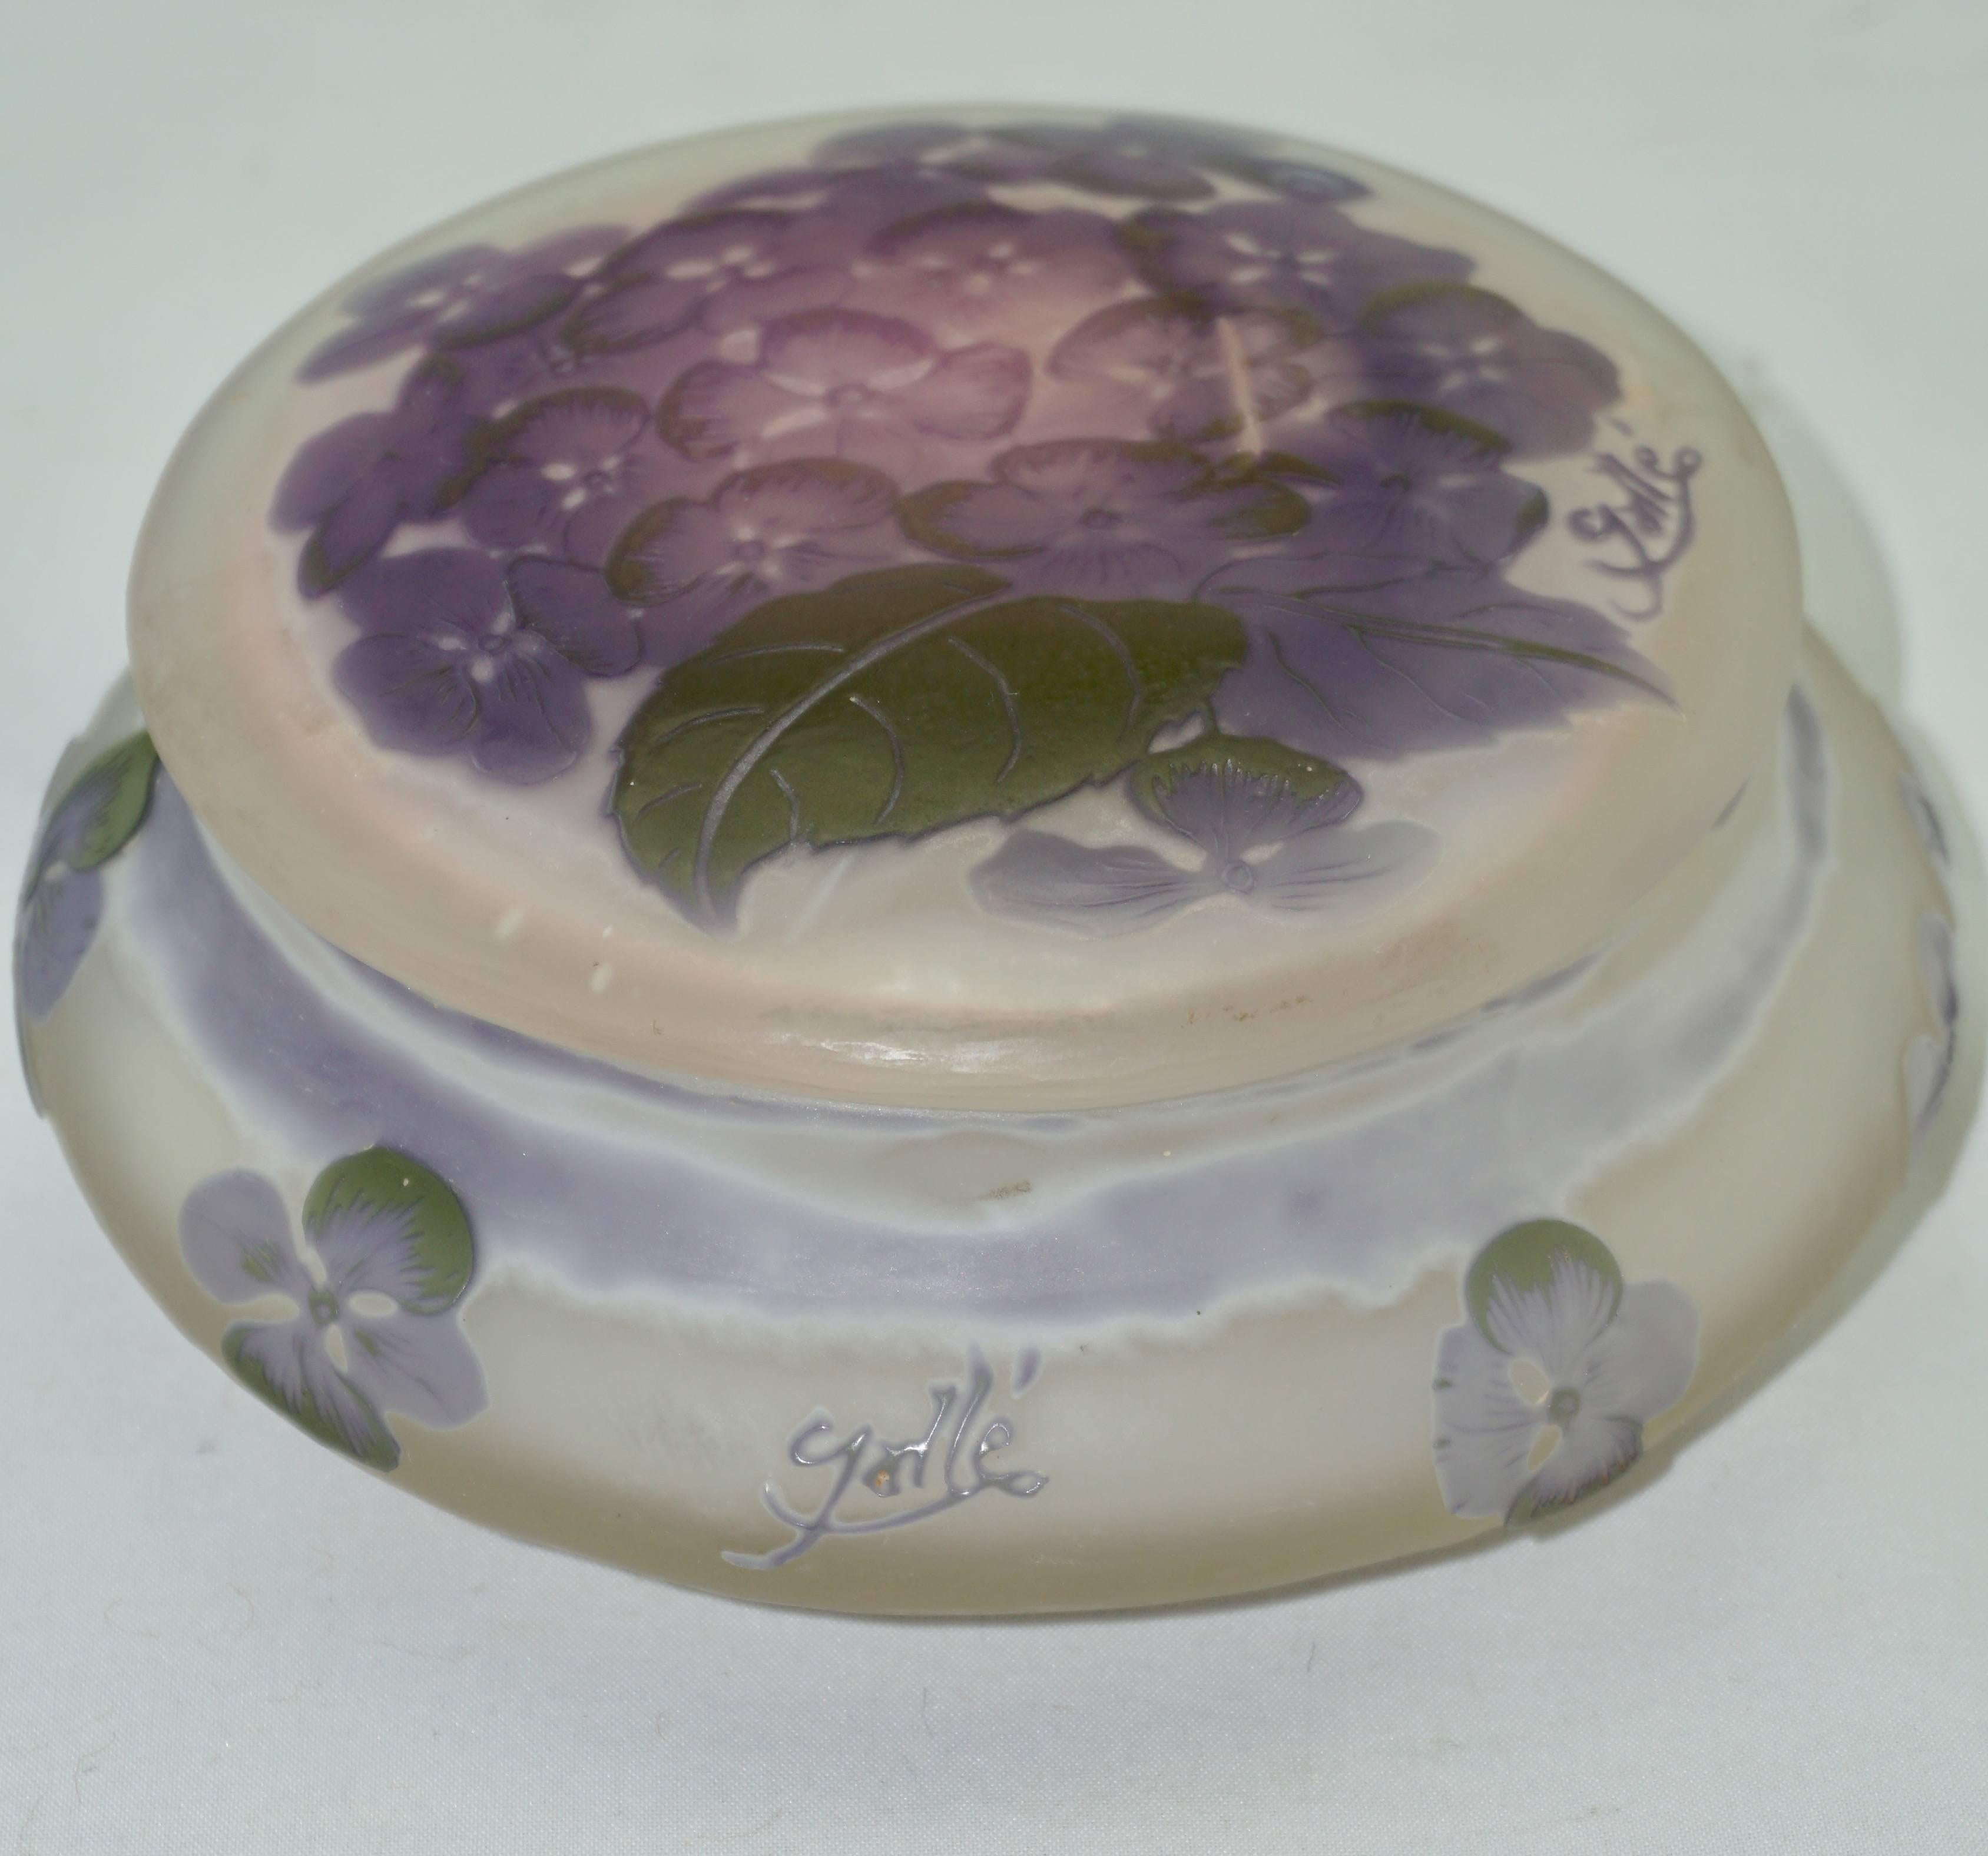 A gorgeous French Art Nouveau Emile Galle cameo, acid etched and slightly fire polished powder box. Four colors